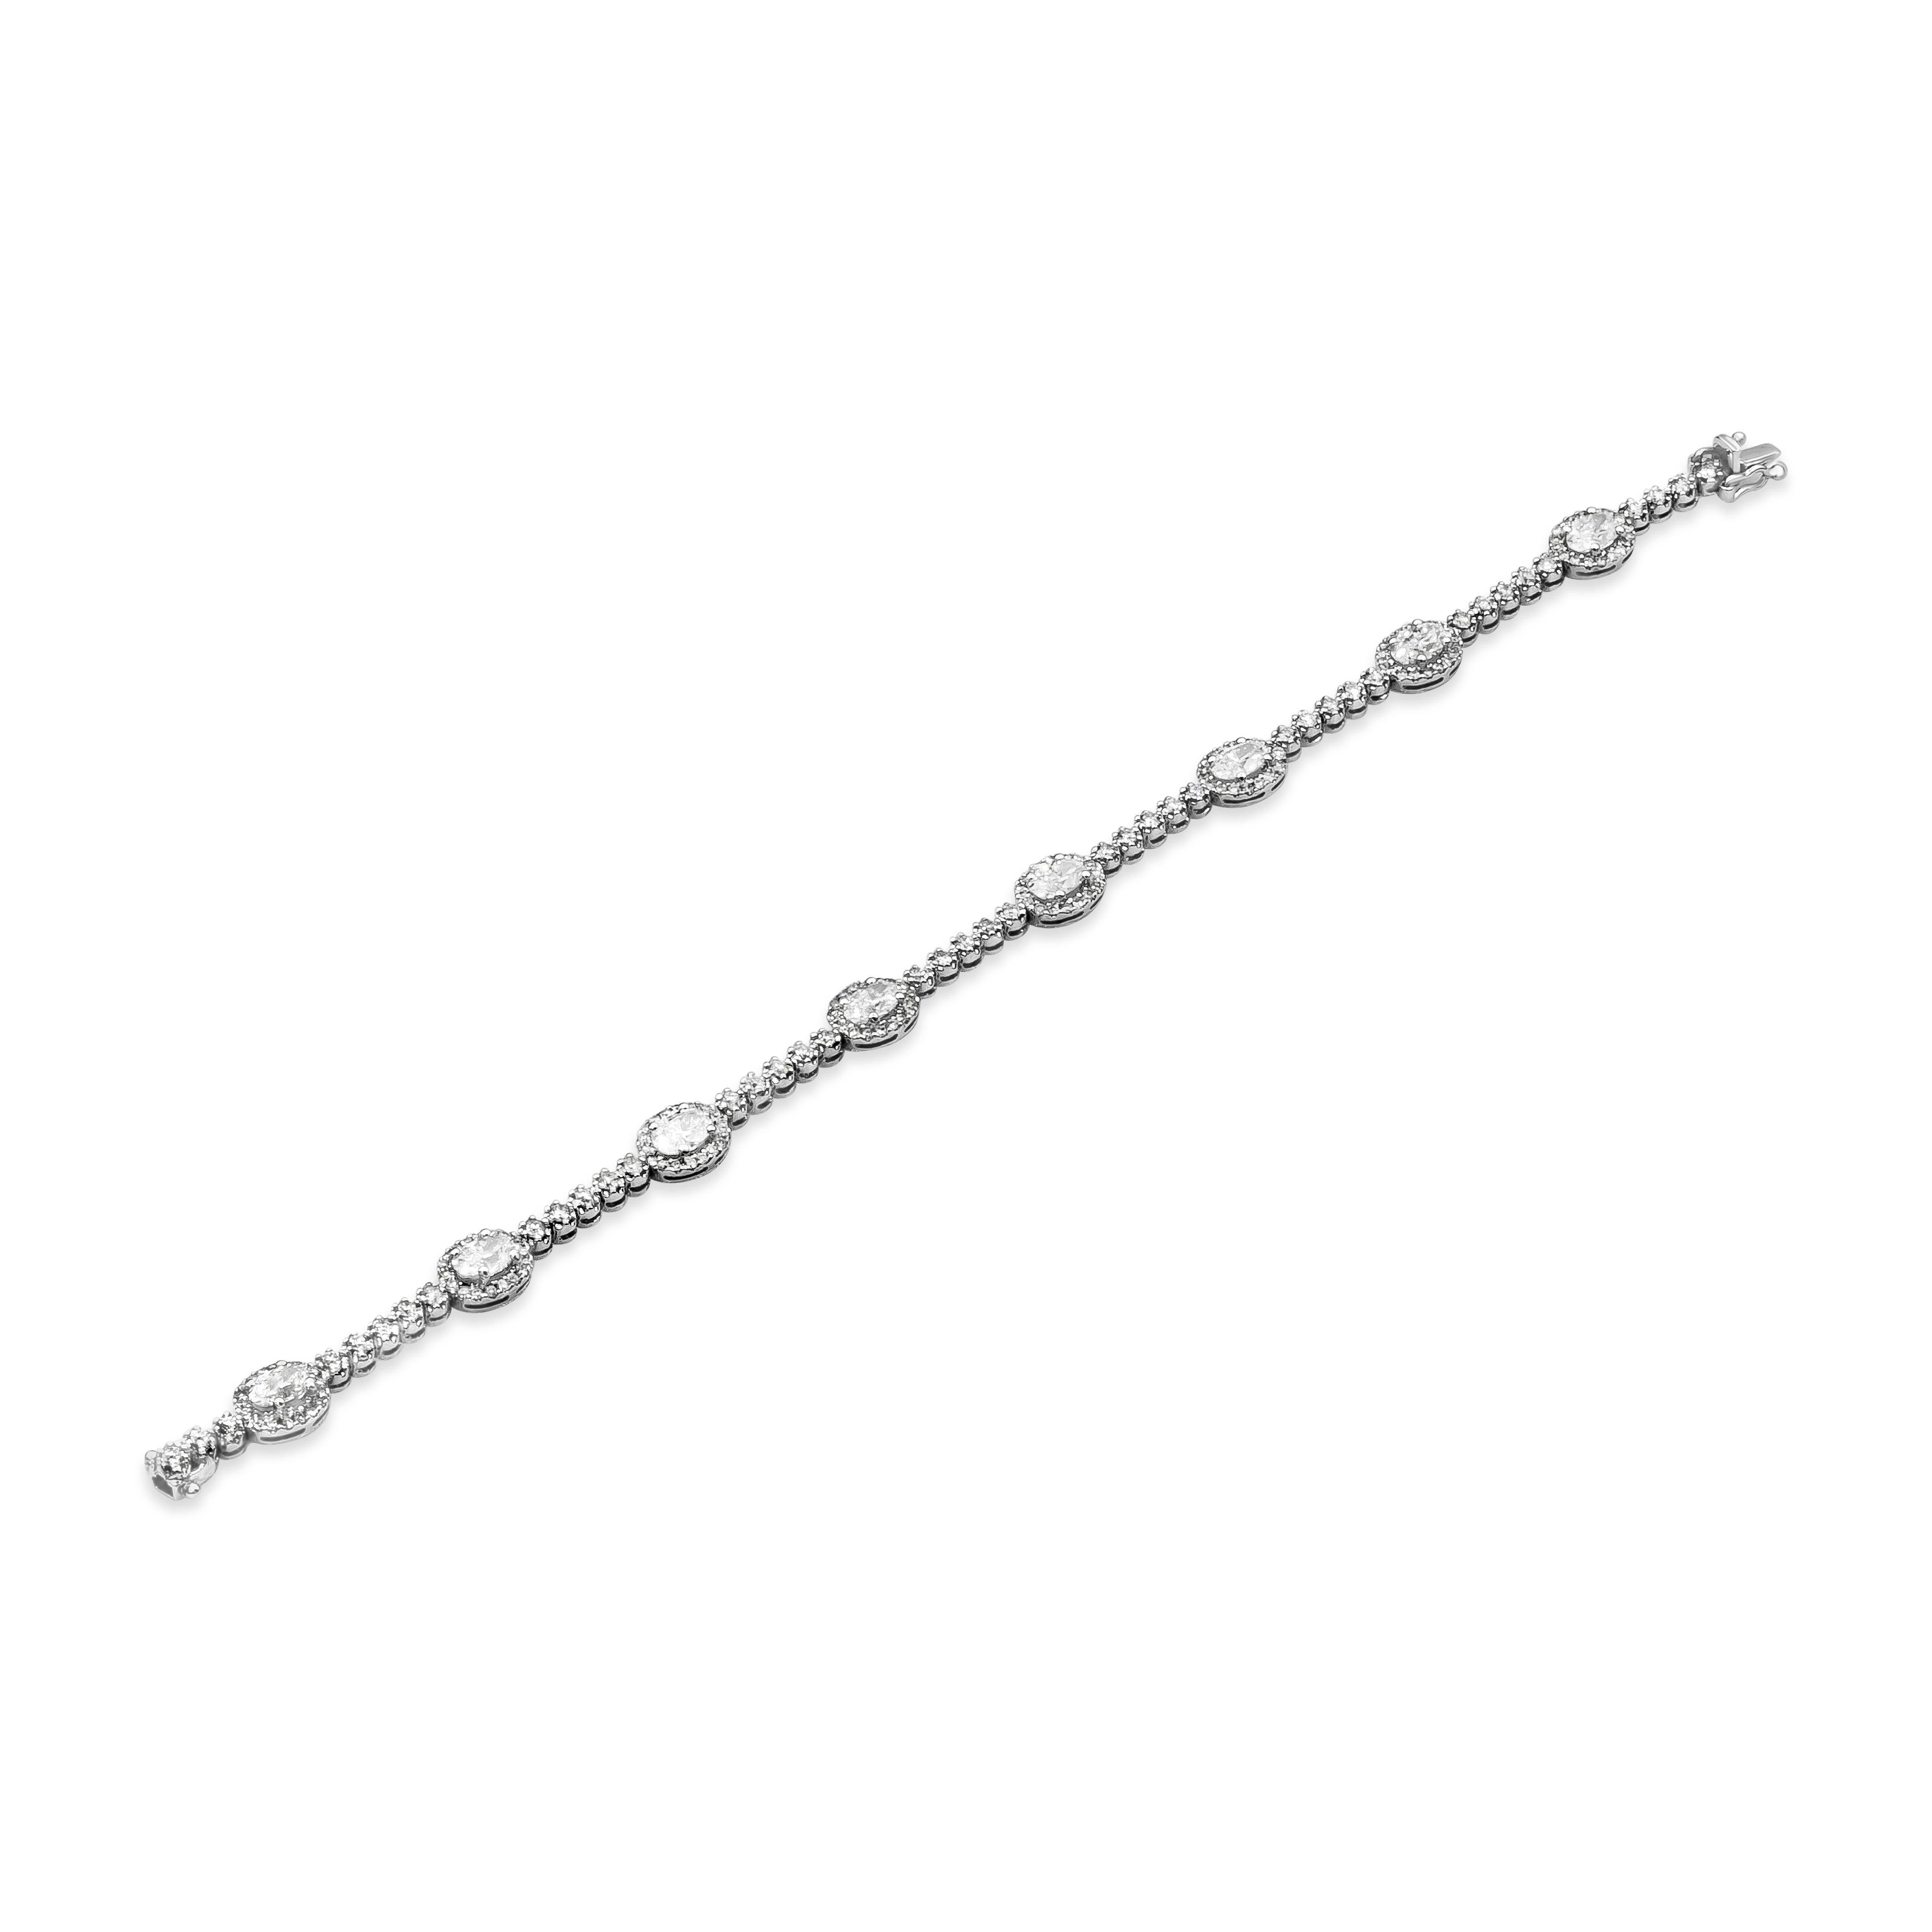 A classic diamond halo style tennis bracelet showcasing 2.46 carat total oval cut diamonds surrounded by a row of brilliant round diamonds, separated by five round diamonds. Weight of the accenting round diamonds is 1.52 carats total. Made with 18K